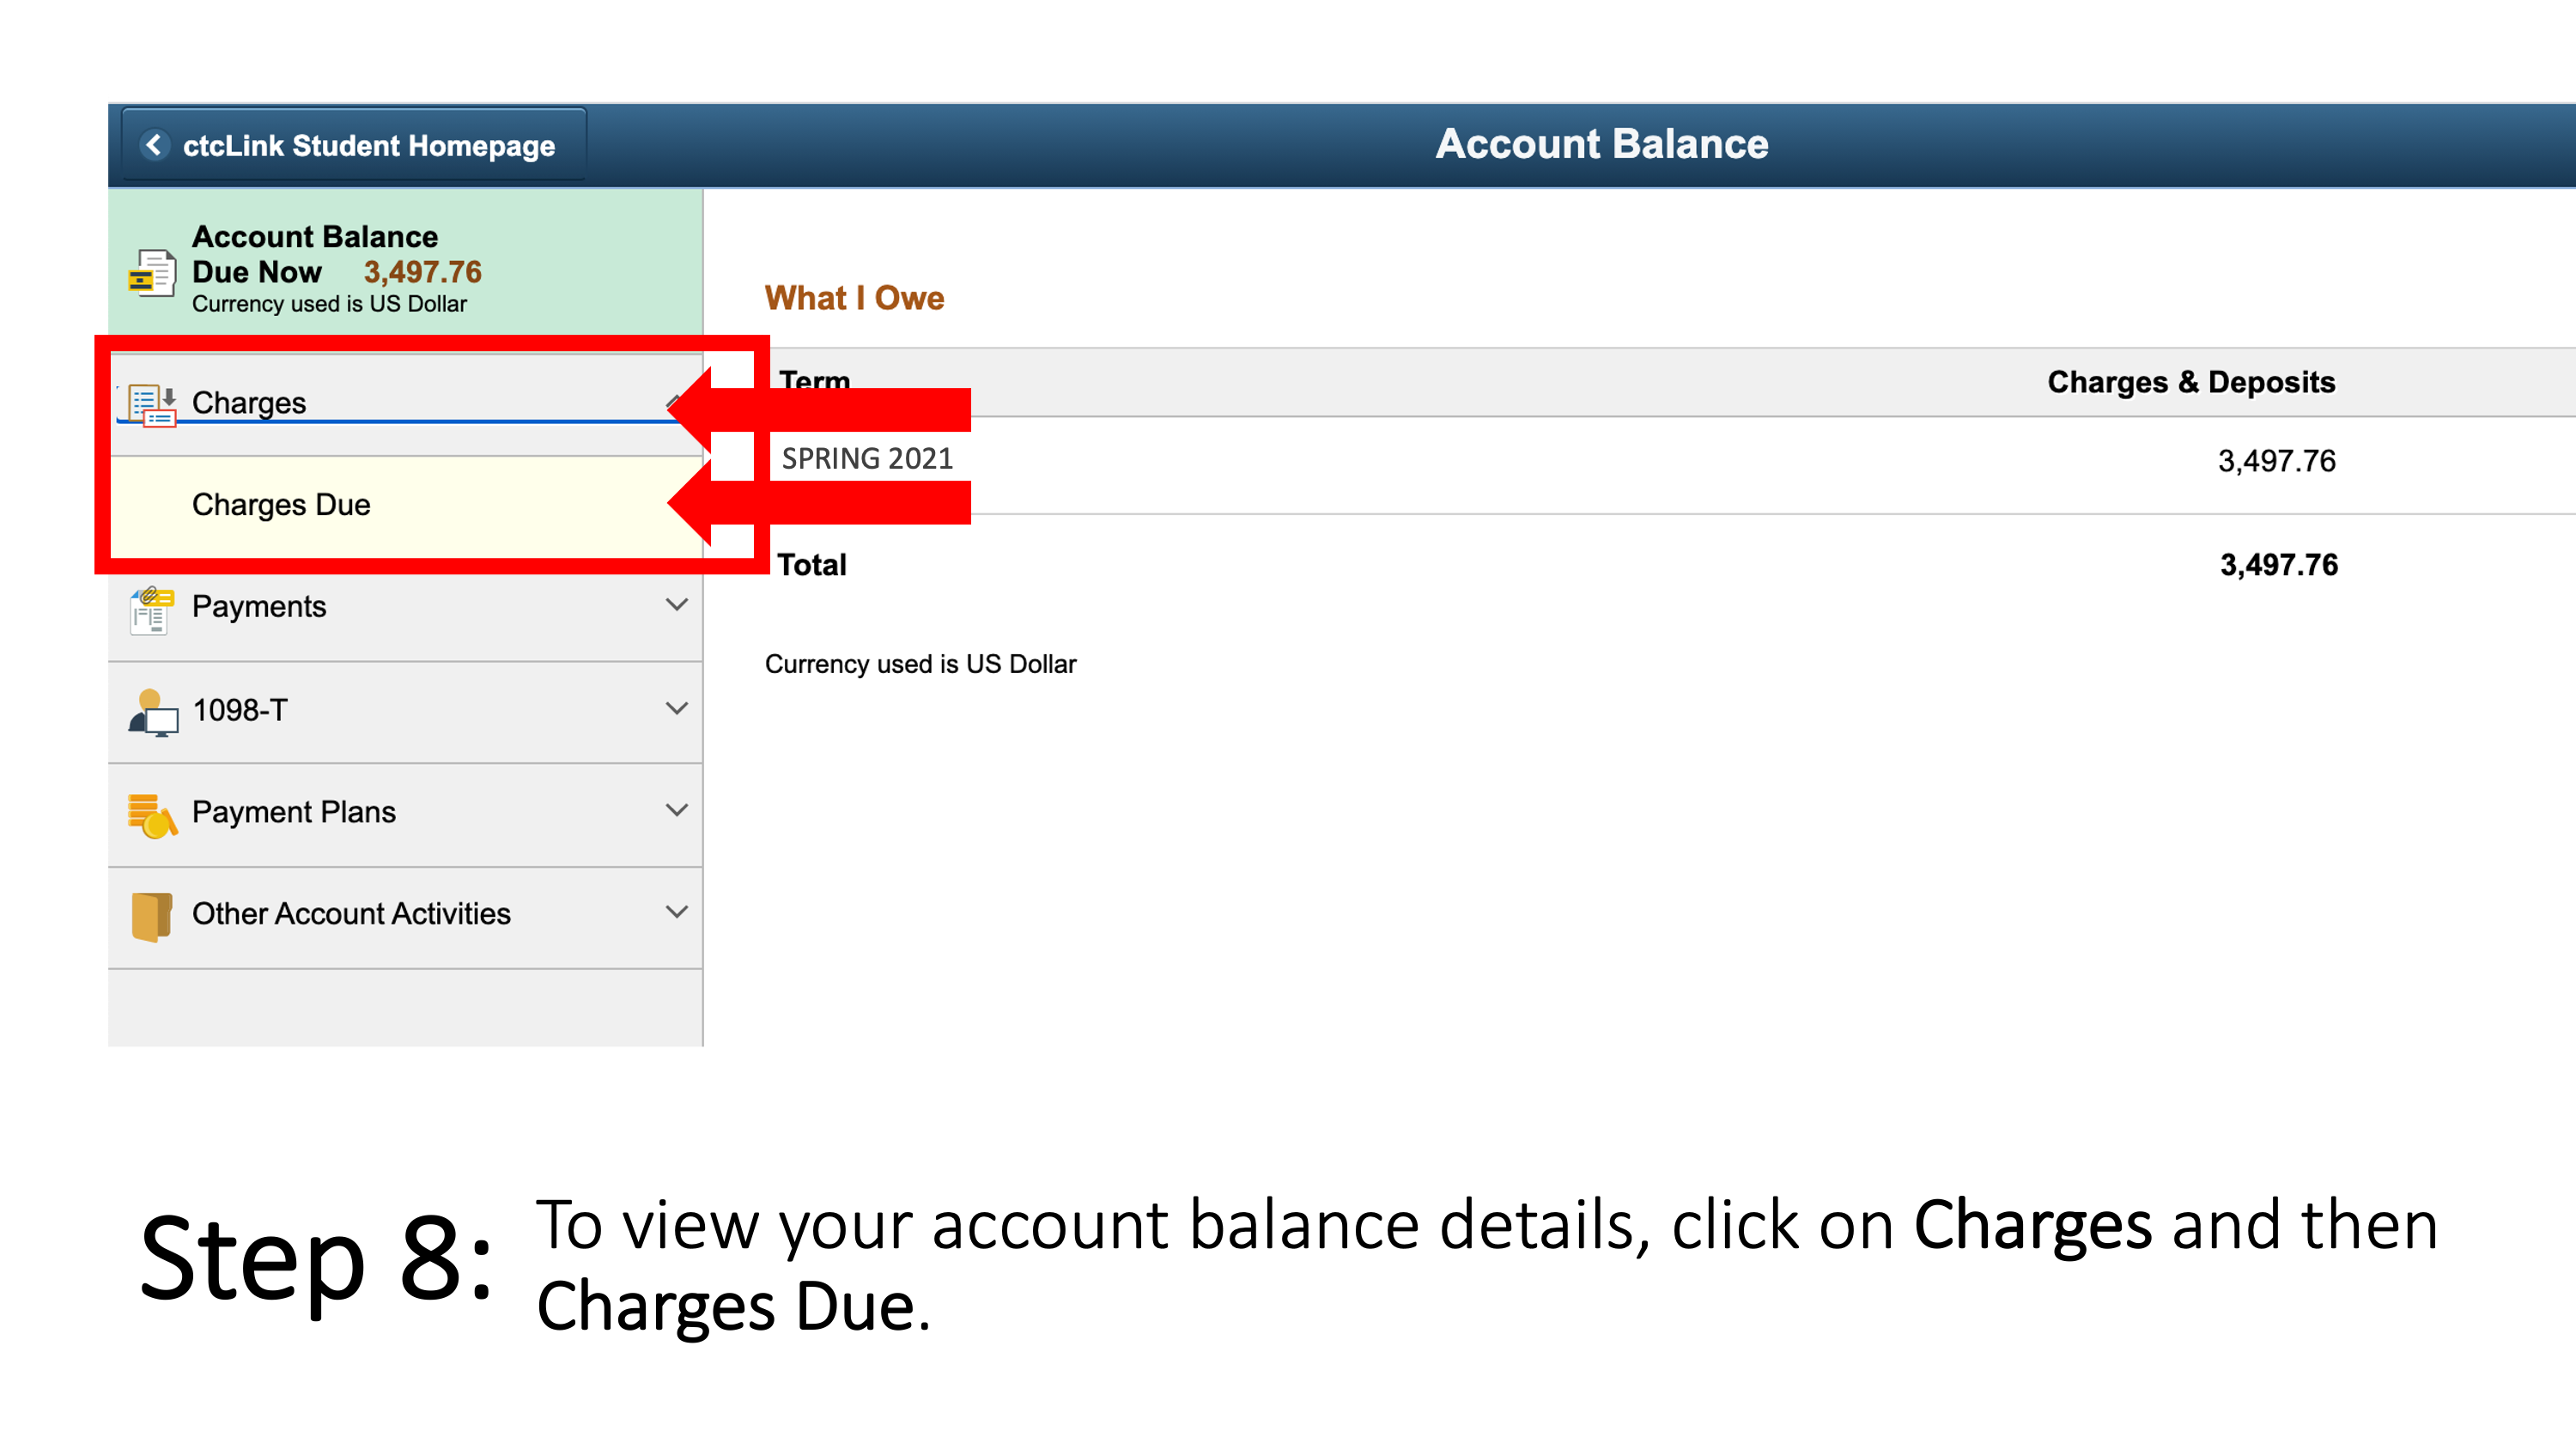 To view your account balance details, click on Charges and then Charges Due.